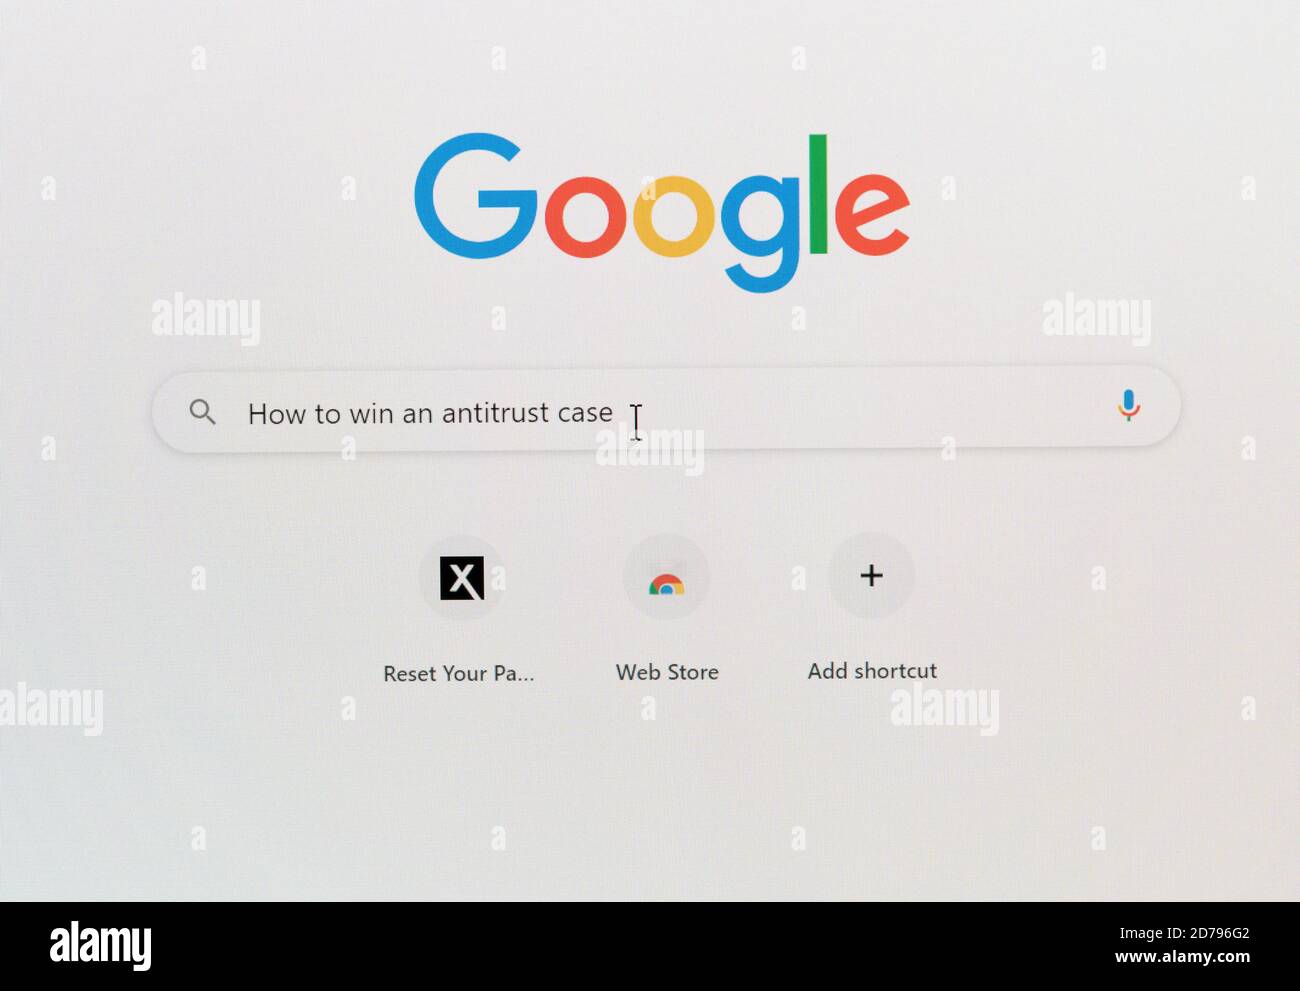 Morgantown, WV - 21 October 2020: Close up of computer screen with question on How to win an anti-trust case in Google search box Stock Photo